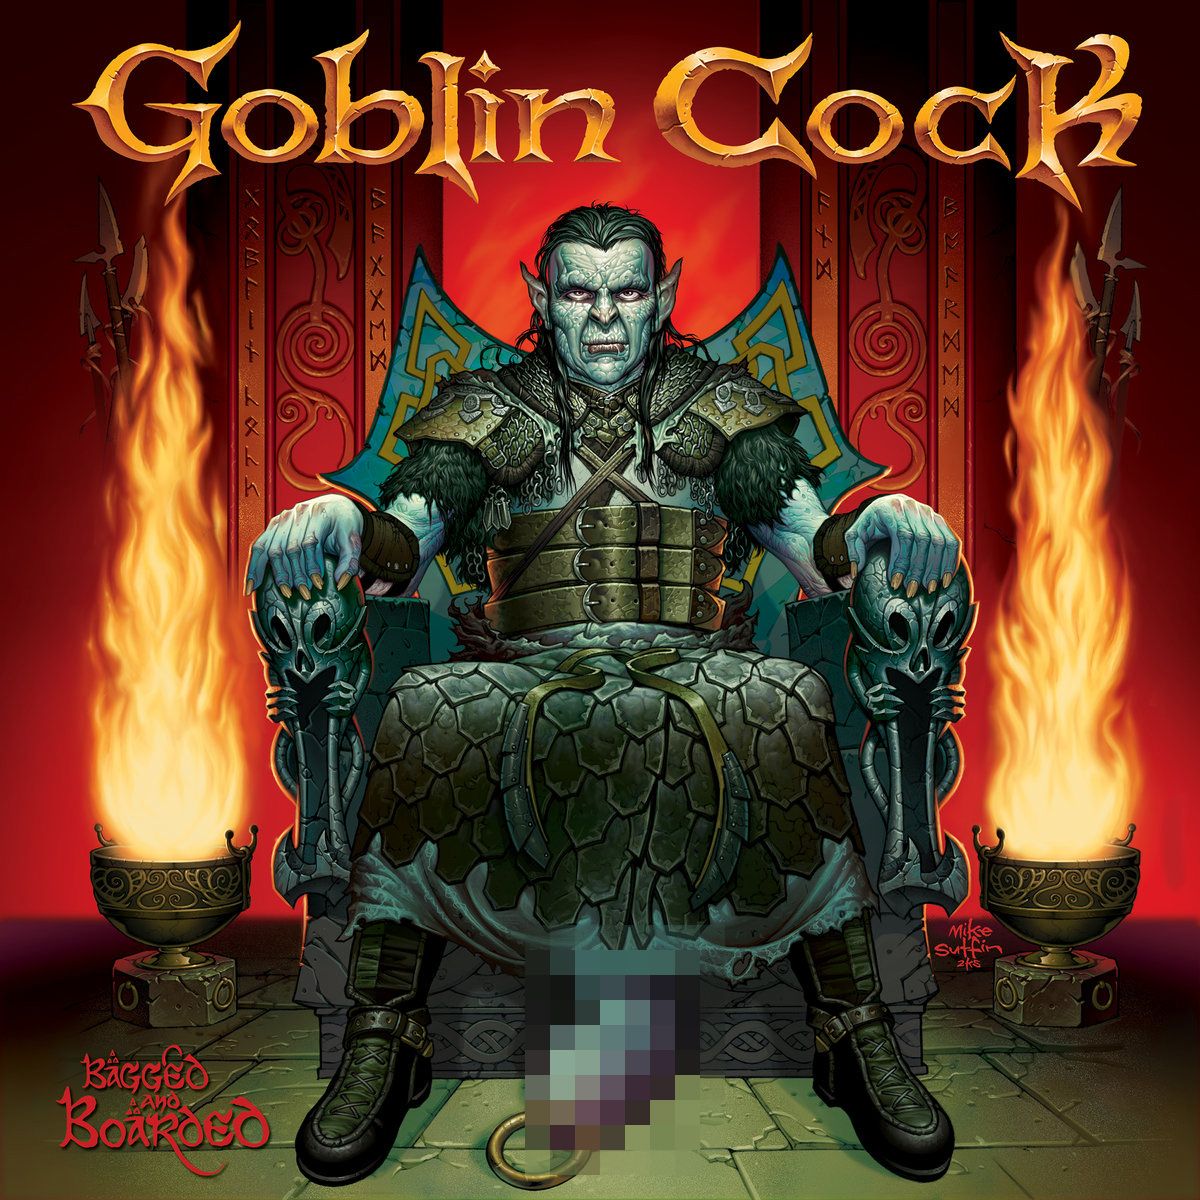 'Bagged and Boarded' by Goblin Cock